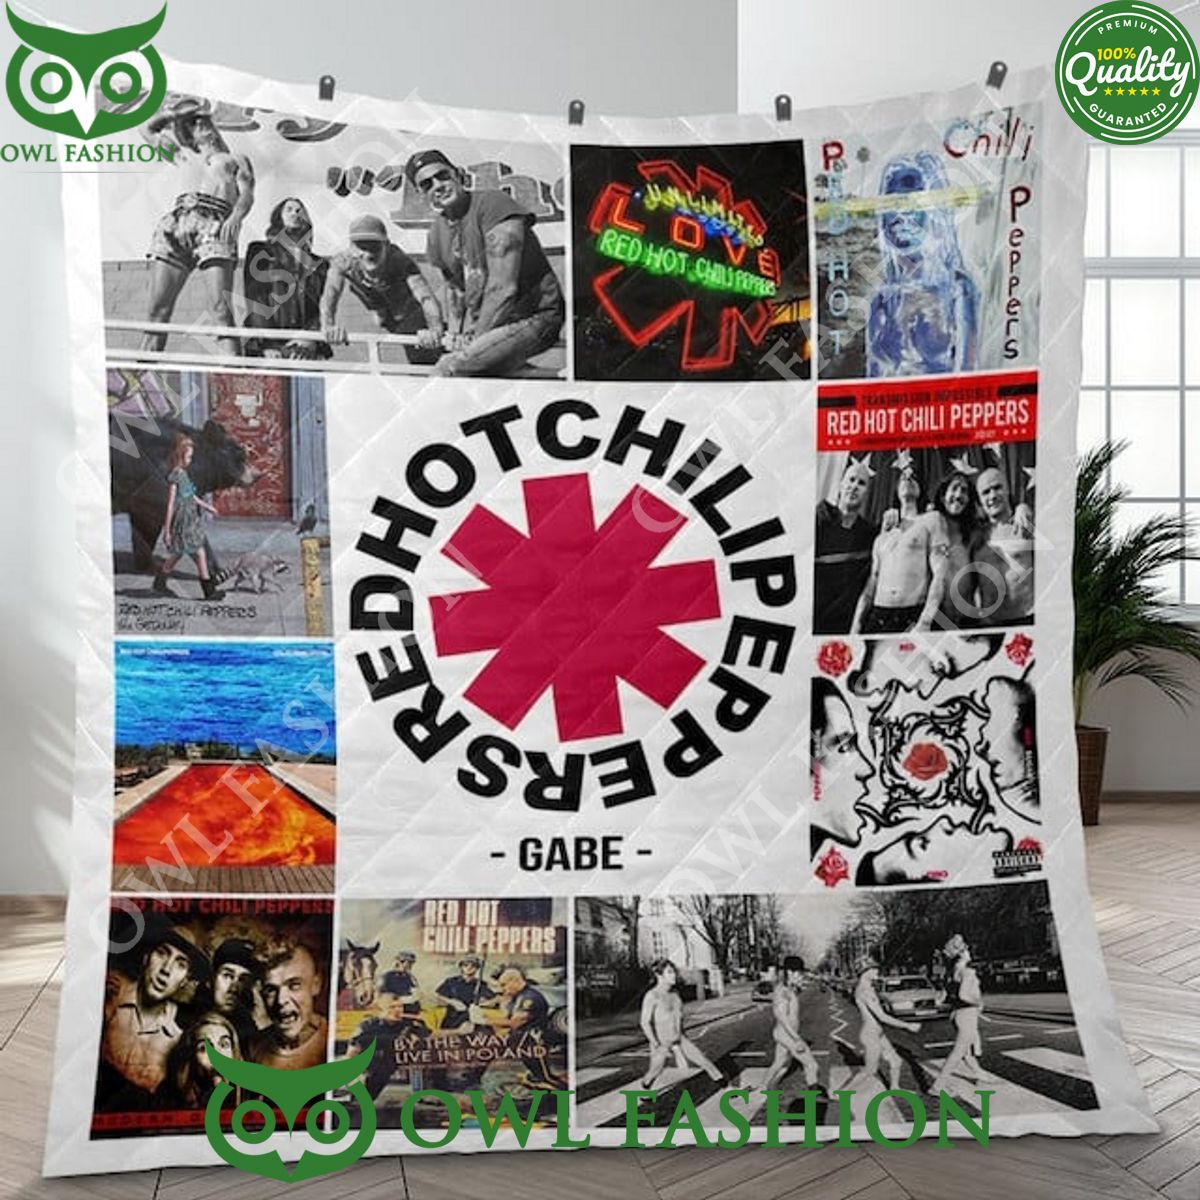 red hot chili peppers tell me baby album quilt blanket 1 0Bvd1.jpg